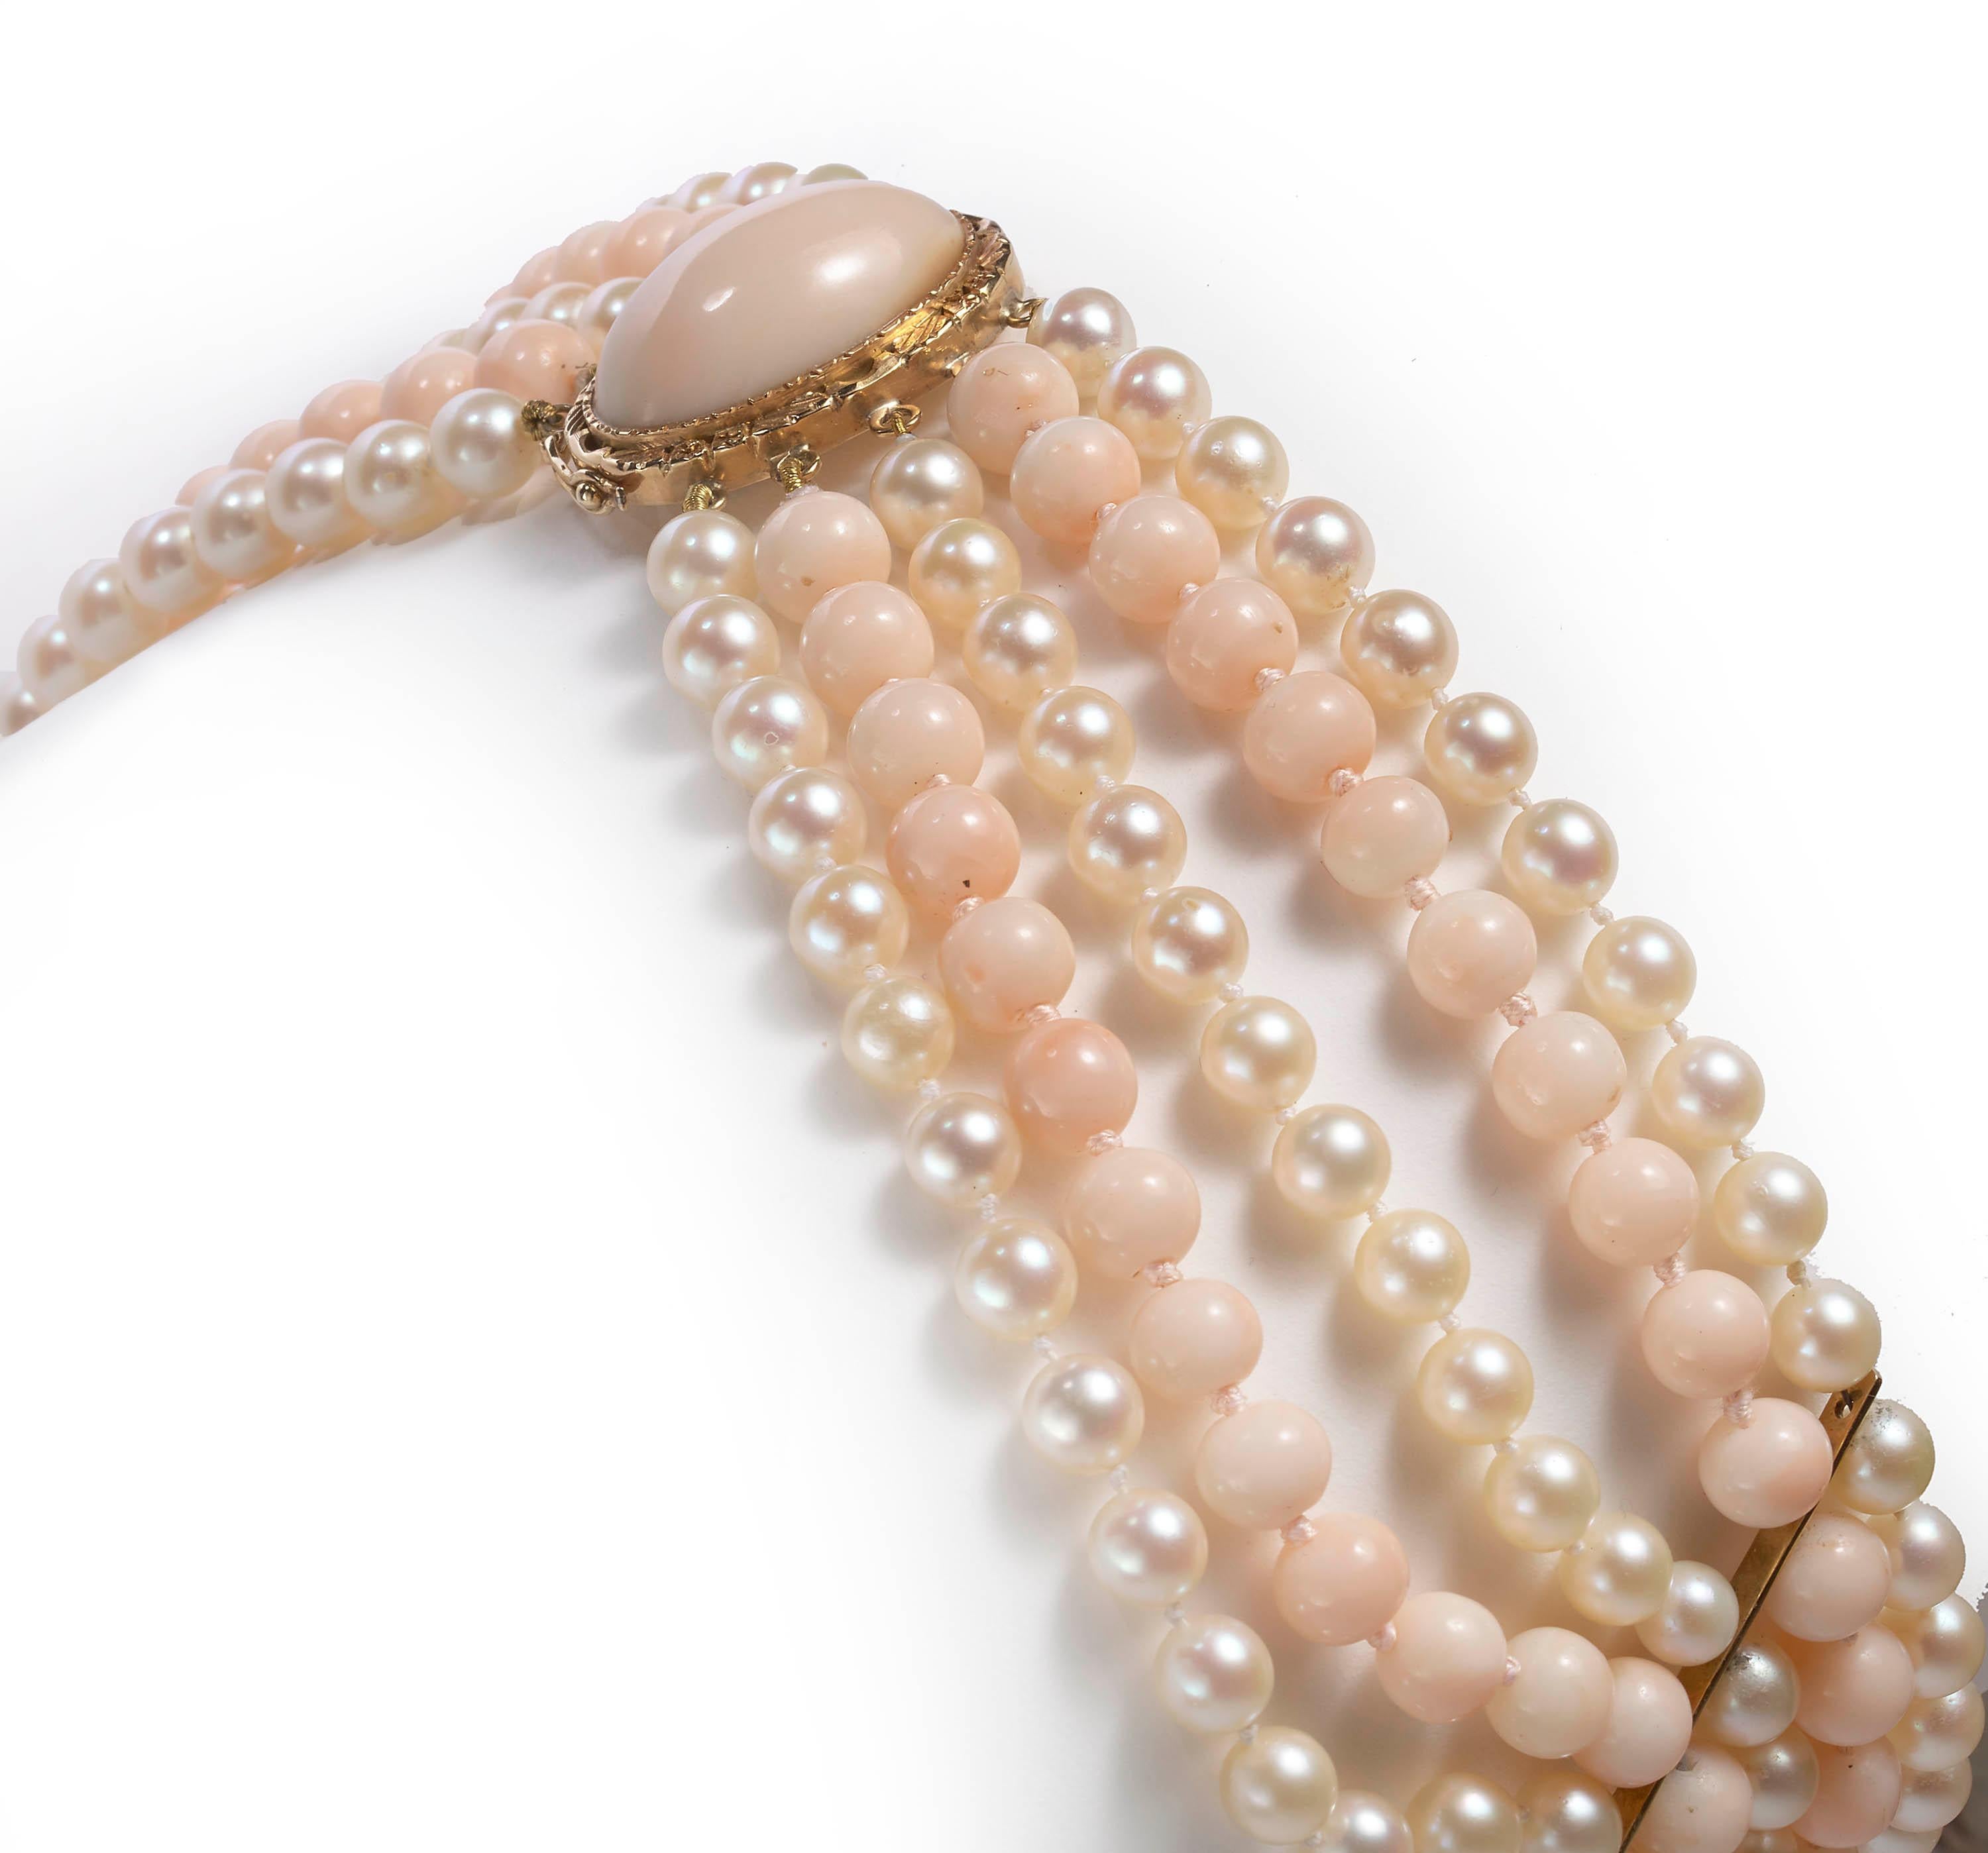 A vintage five row necklace, comprised of three rows of 6mm white cultured pearls and two rows of 8mm round pale pink coral beads, with two 18ct yellow gold spacer bars, strung on to an oval clasp, set with a cabochon coral. Circa 1970. Stamped